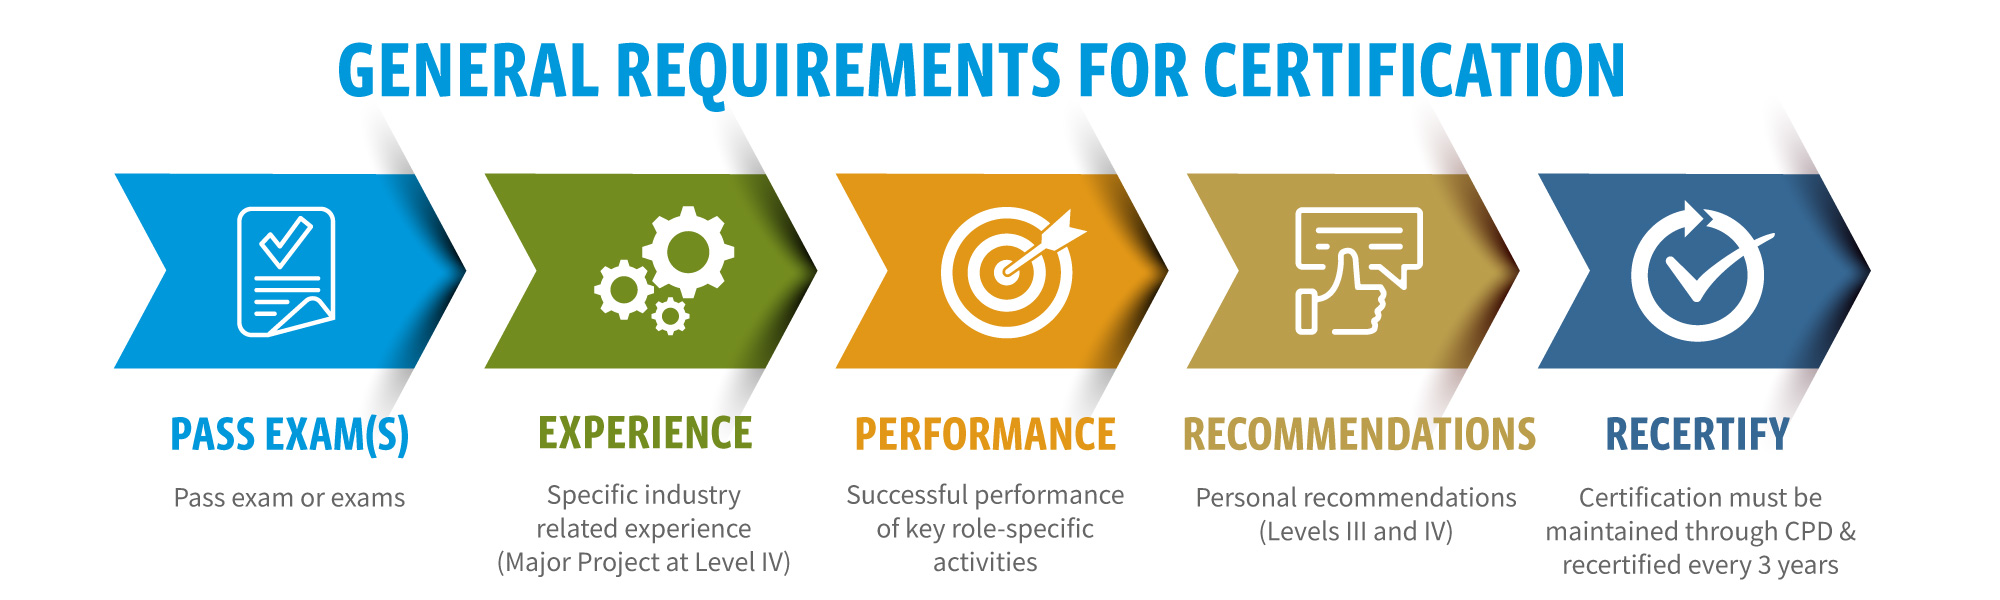 General Requirements for Certification